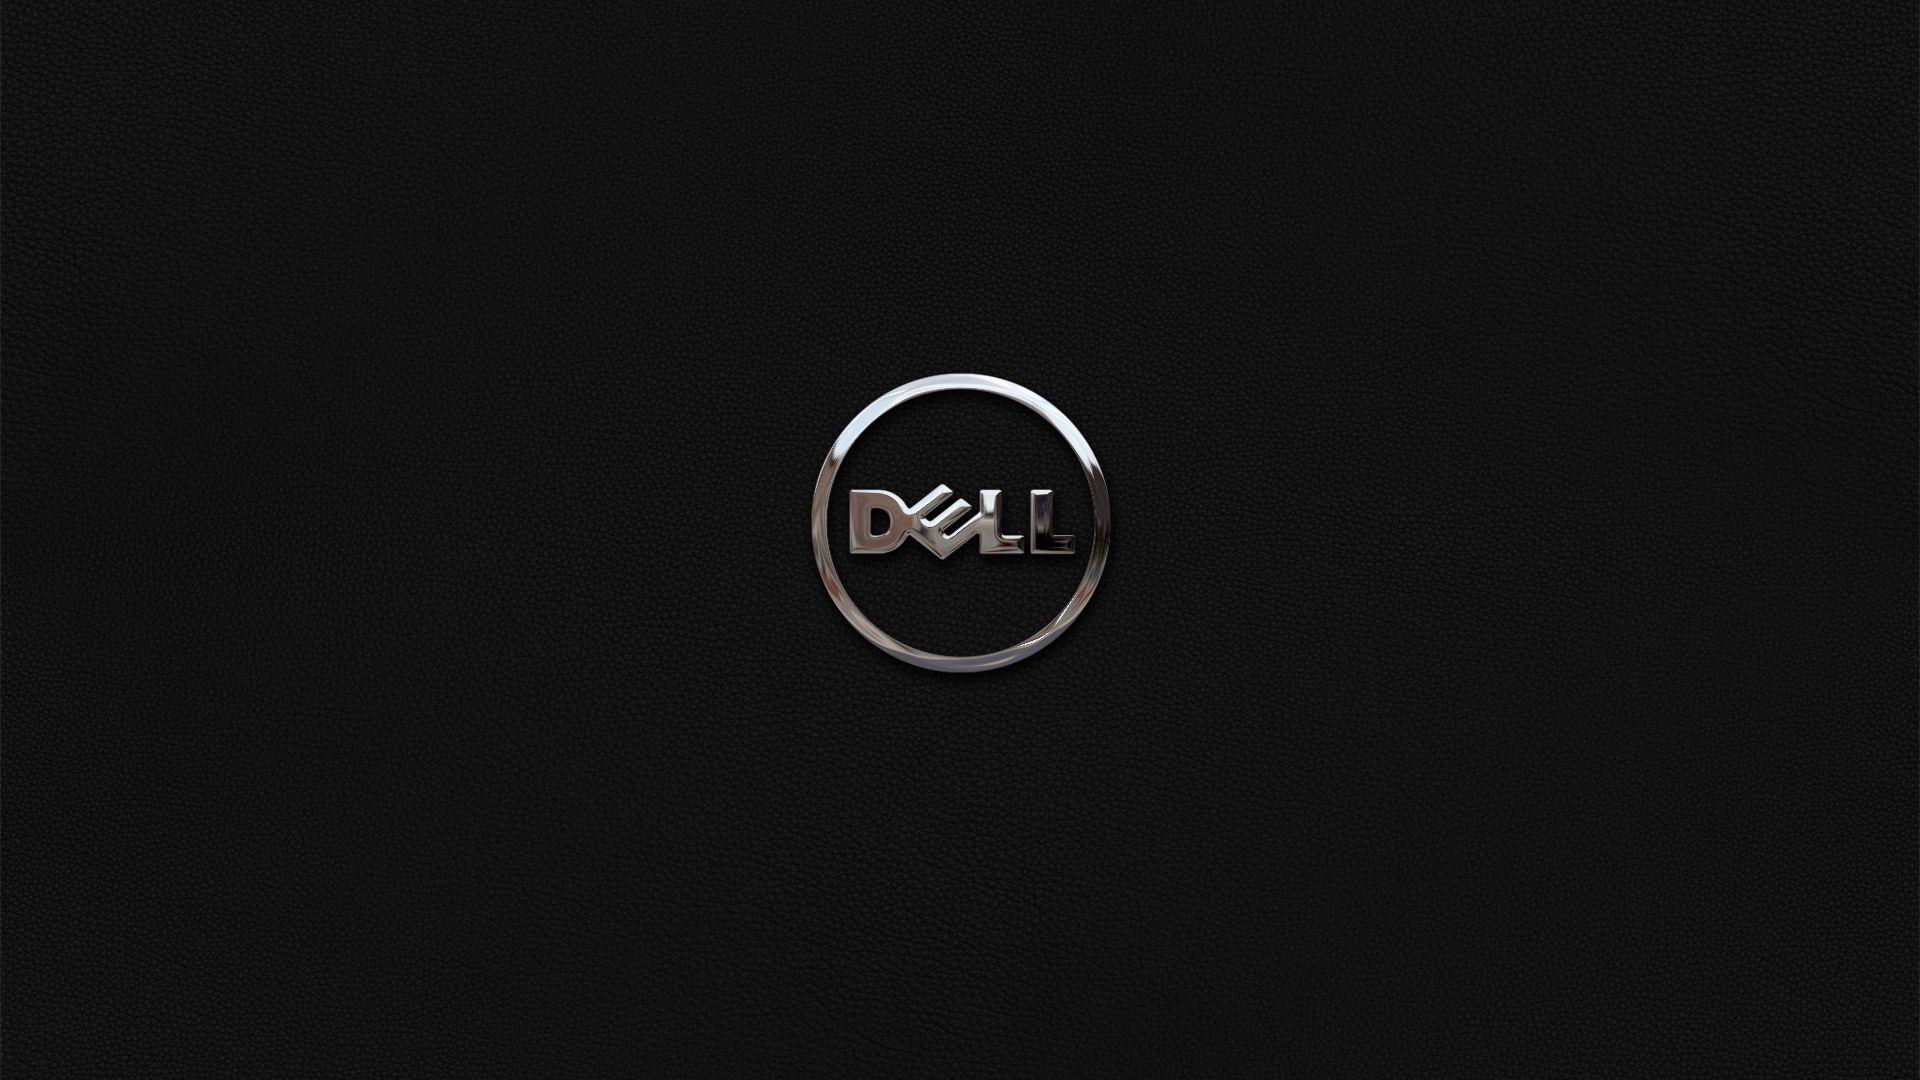 Dell Inspiron Wallpapers Top Free Dell Inspiron Backgrounds Wallpaperaccess